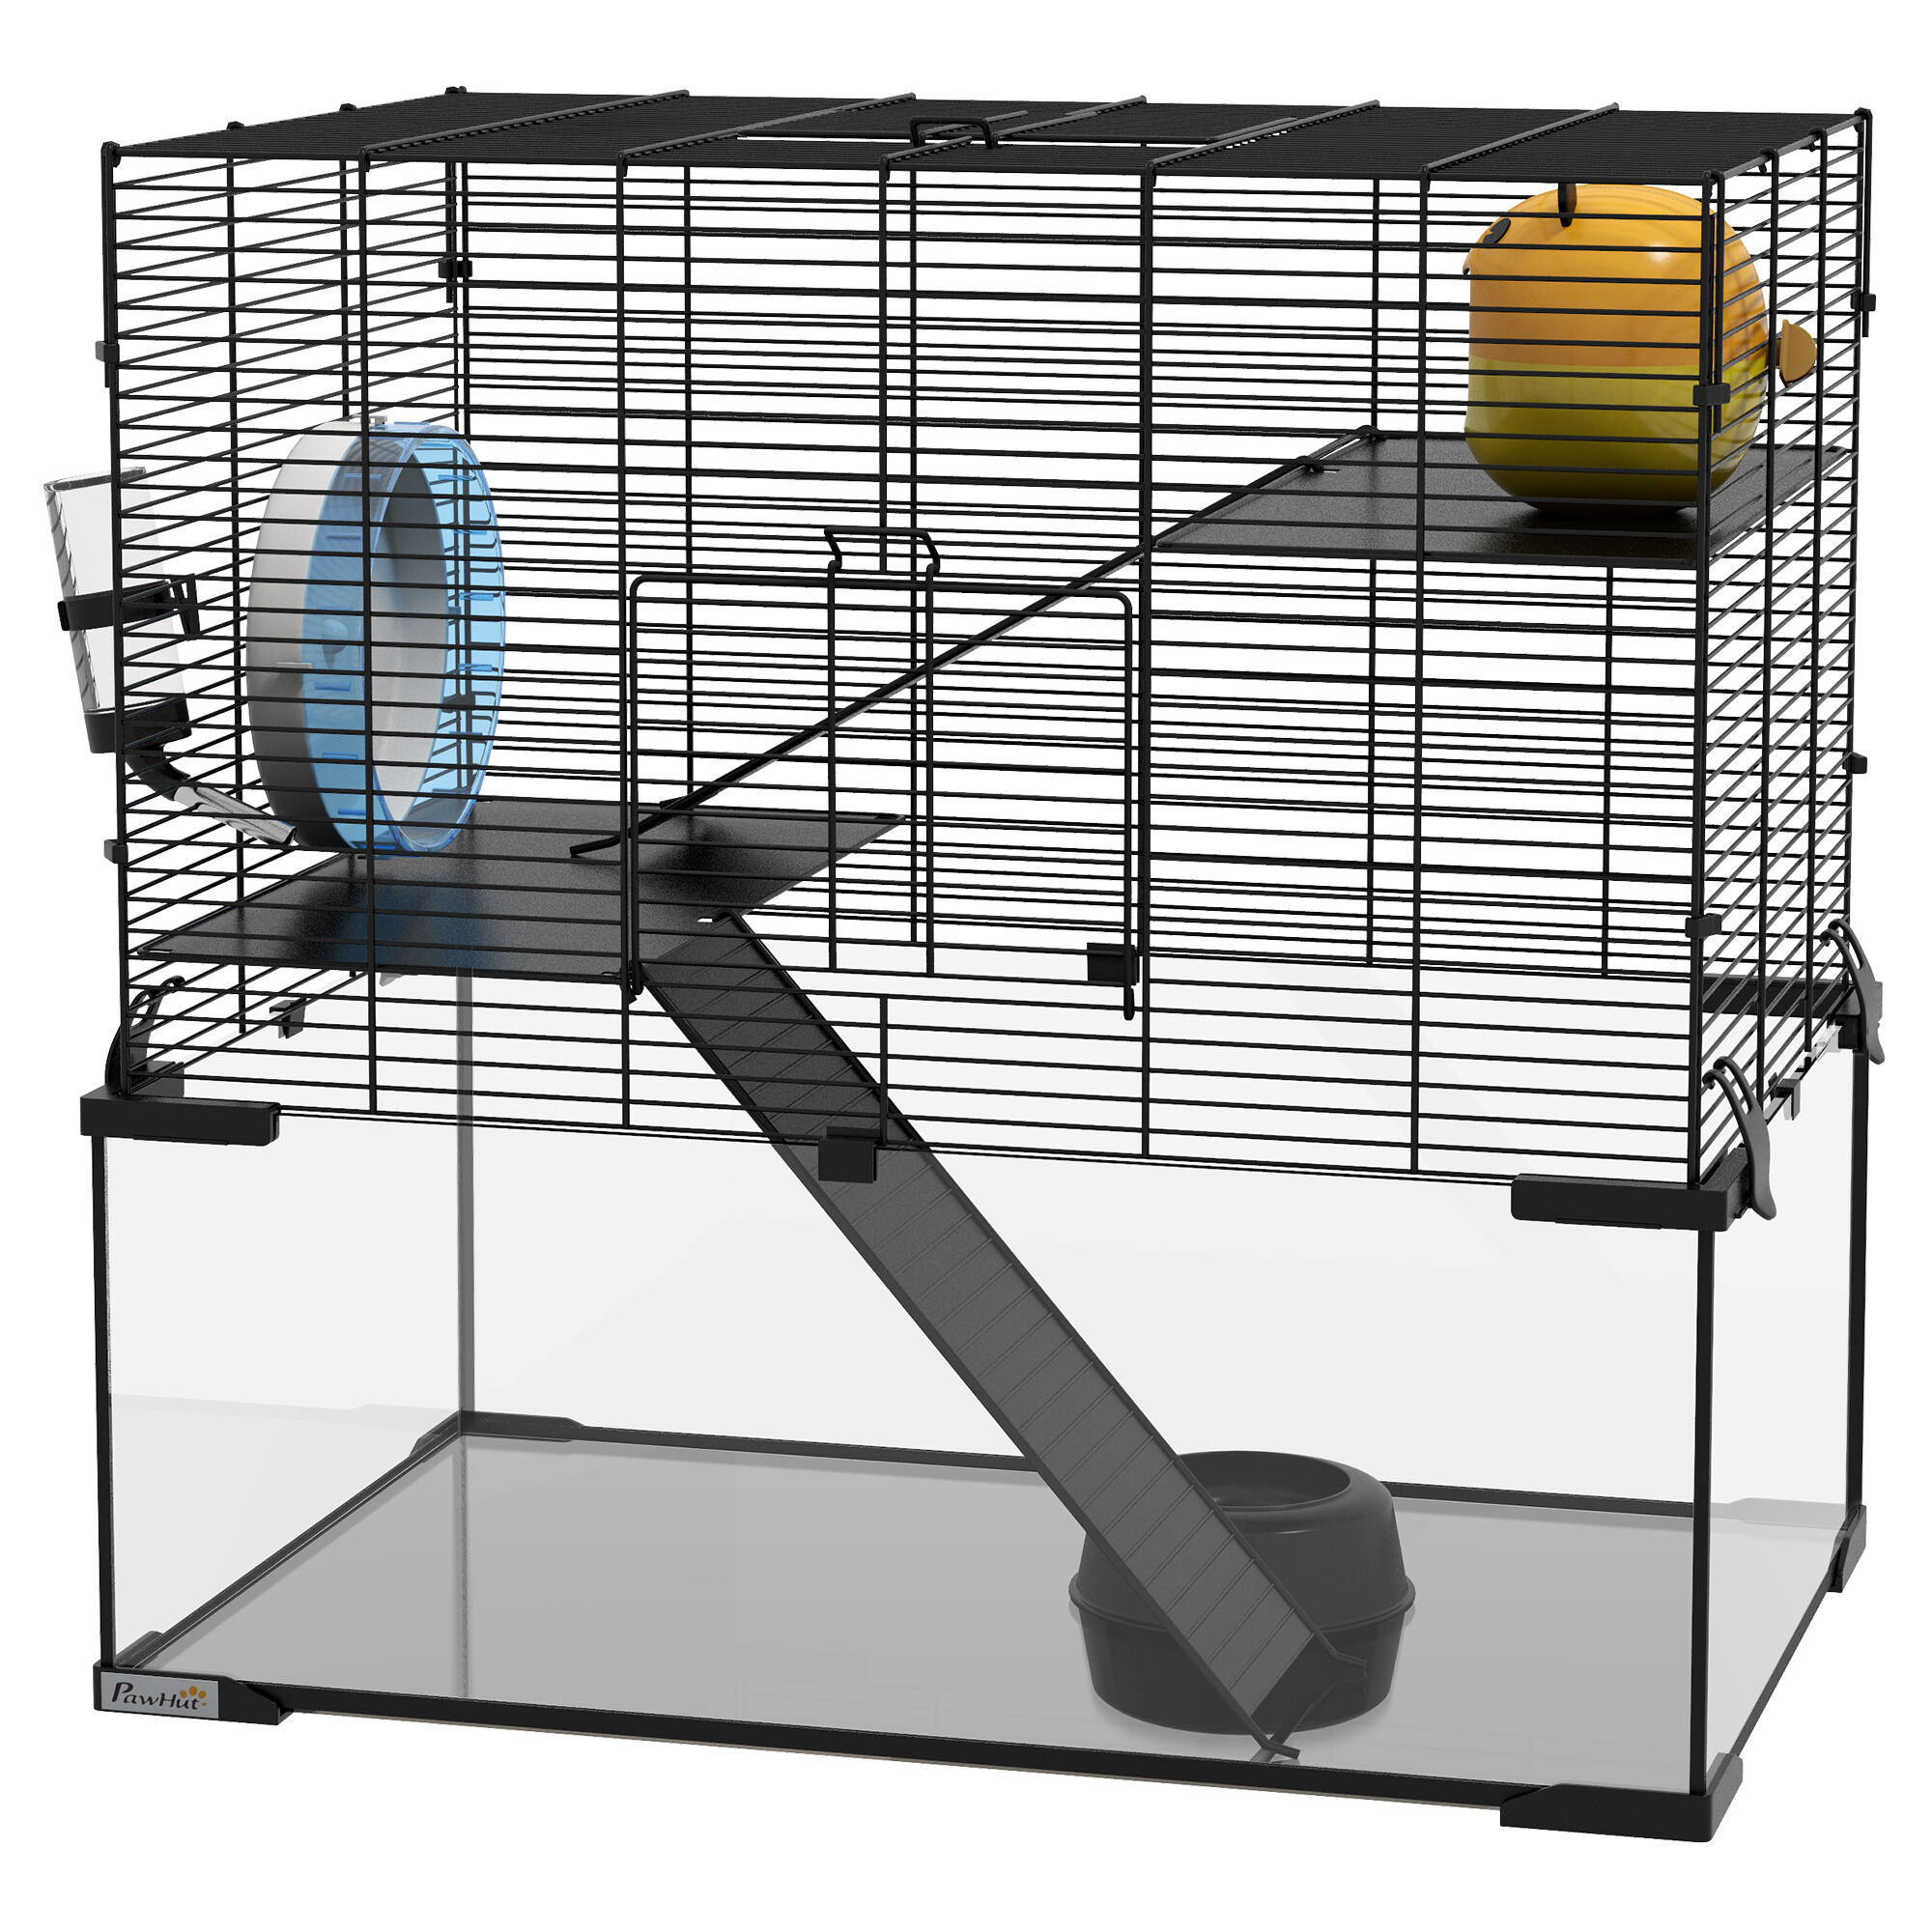 PawHut 3-Tier Hamster Cage with Wheel Water Bottle Food Bowl Black for Small Hamsters   Aosom.com